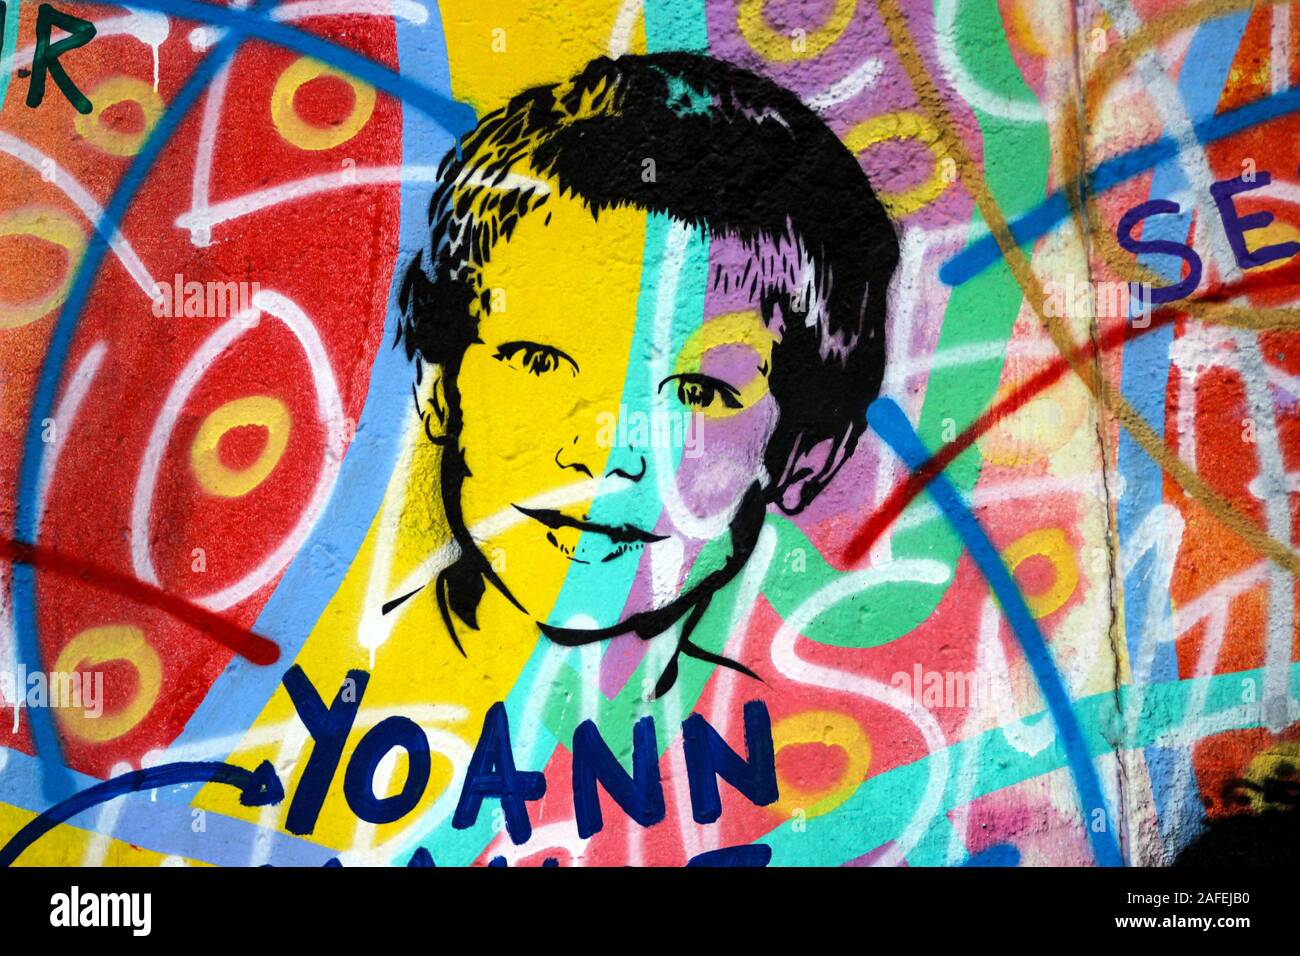 Stencil graffiti on colorful background at East Side Gallery in Berlin, Germany Stock Photo